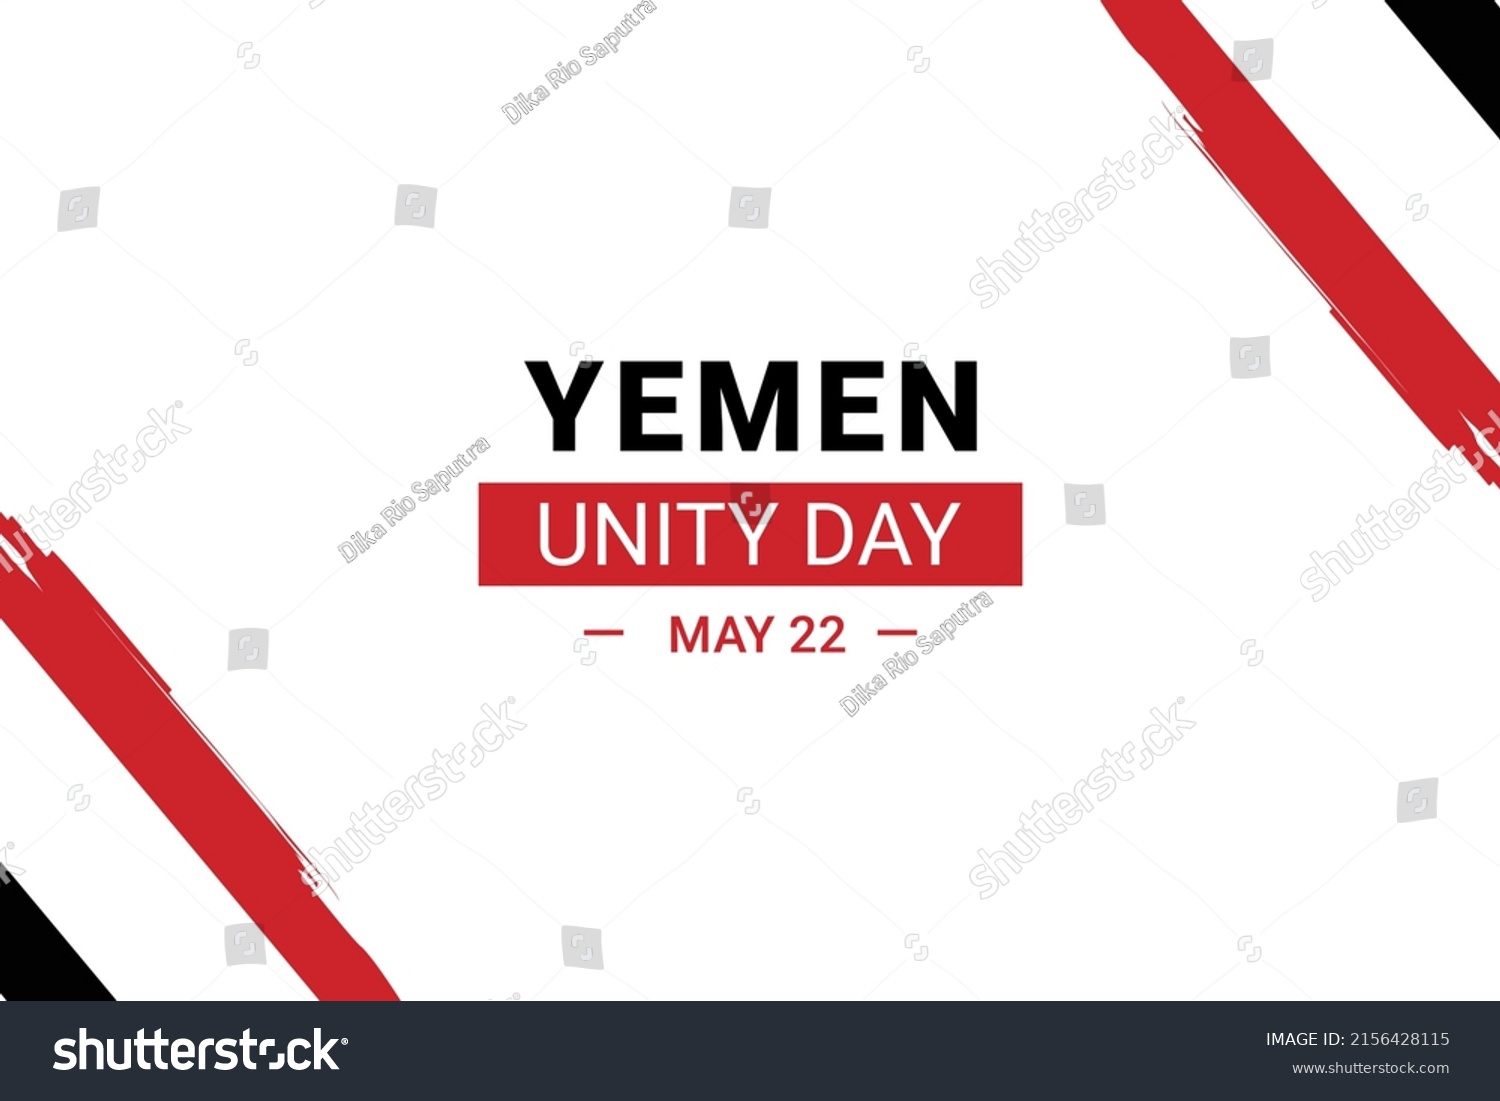 SVG of Yemen Unity Day. Vector Illustration. The illustration is suitable for banners, flyers, stickers, cards, etc. svg